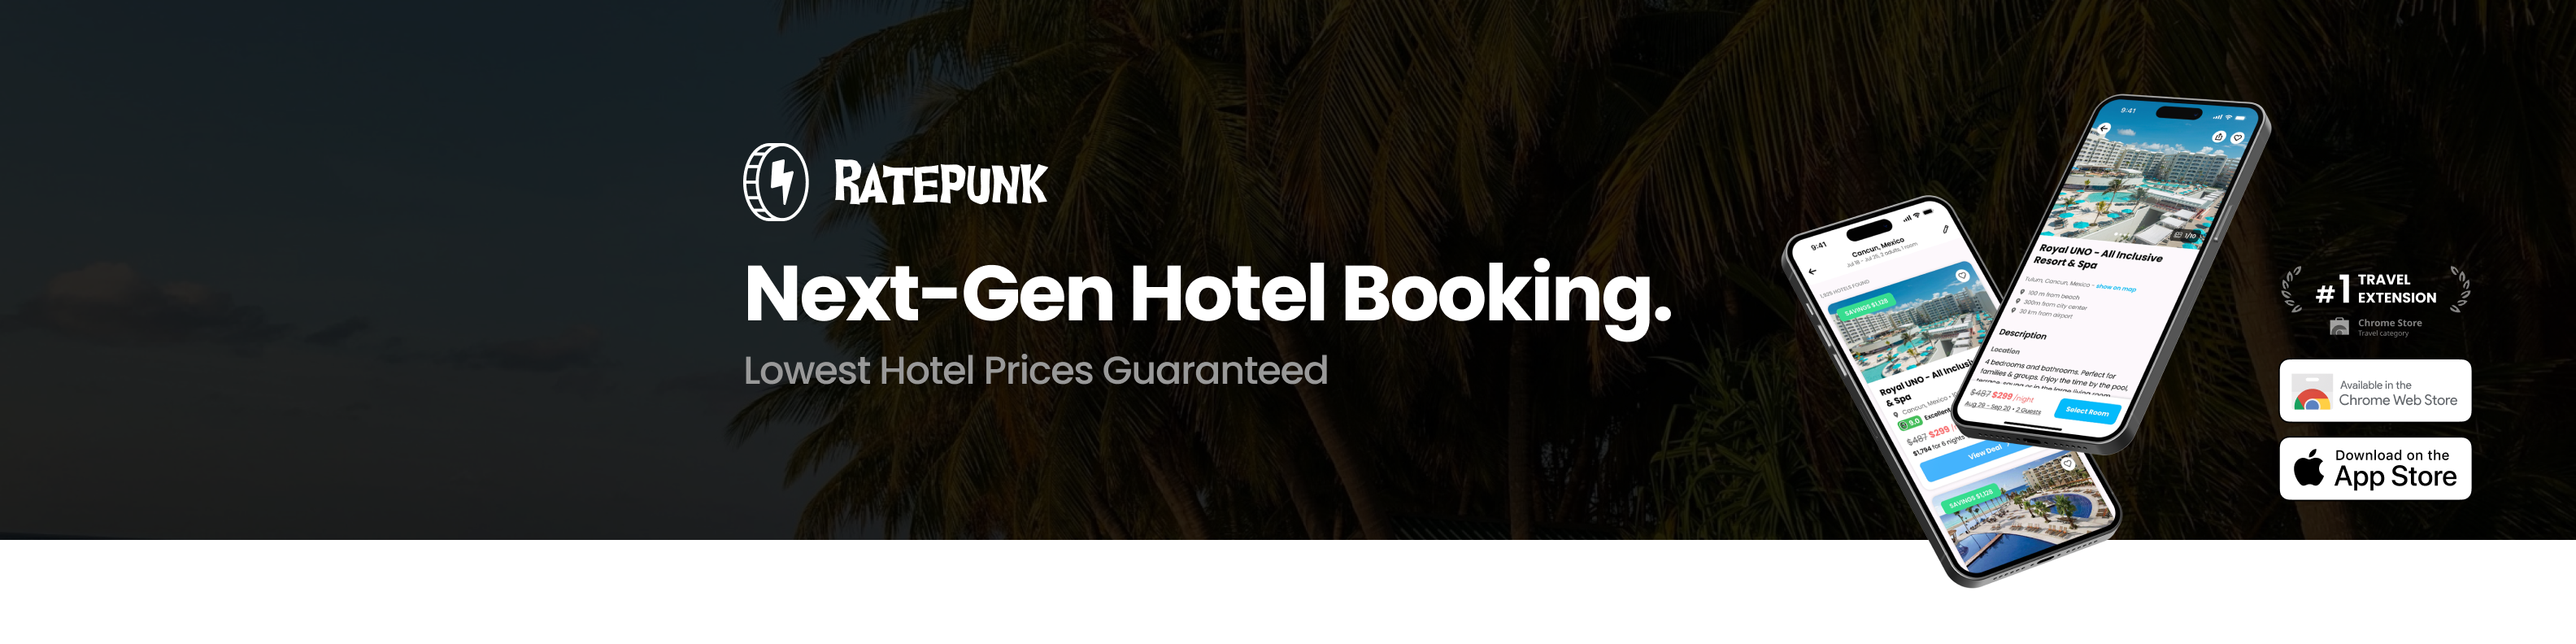 Best Travel Sites for Packages - ratepunk cheaper hotel price finding tool 